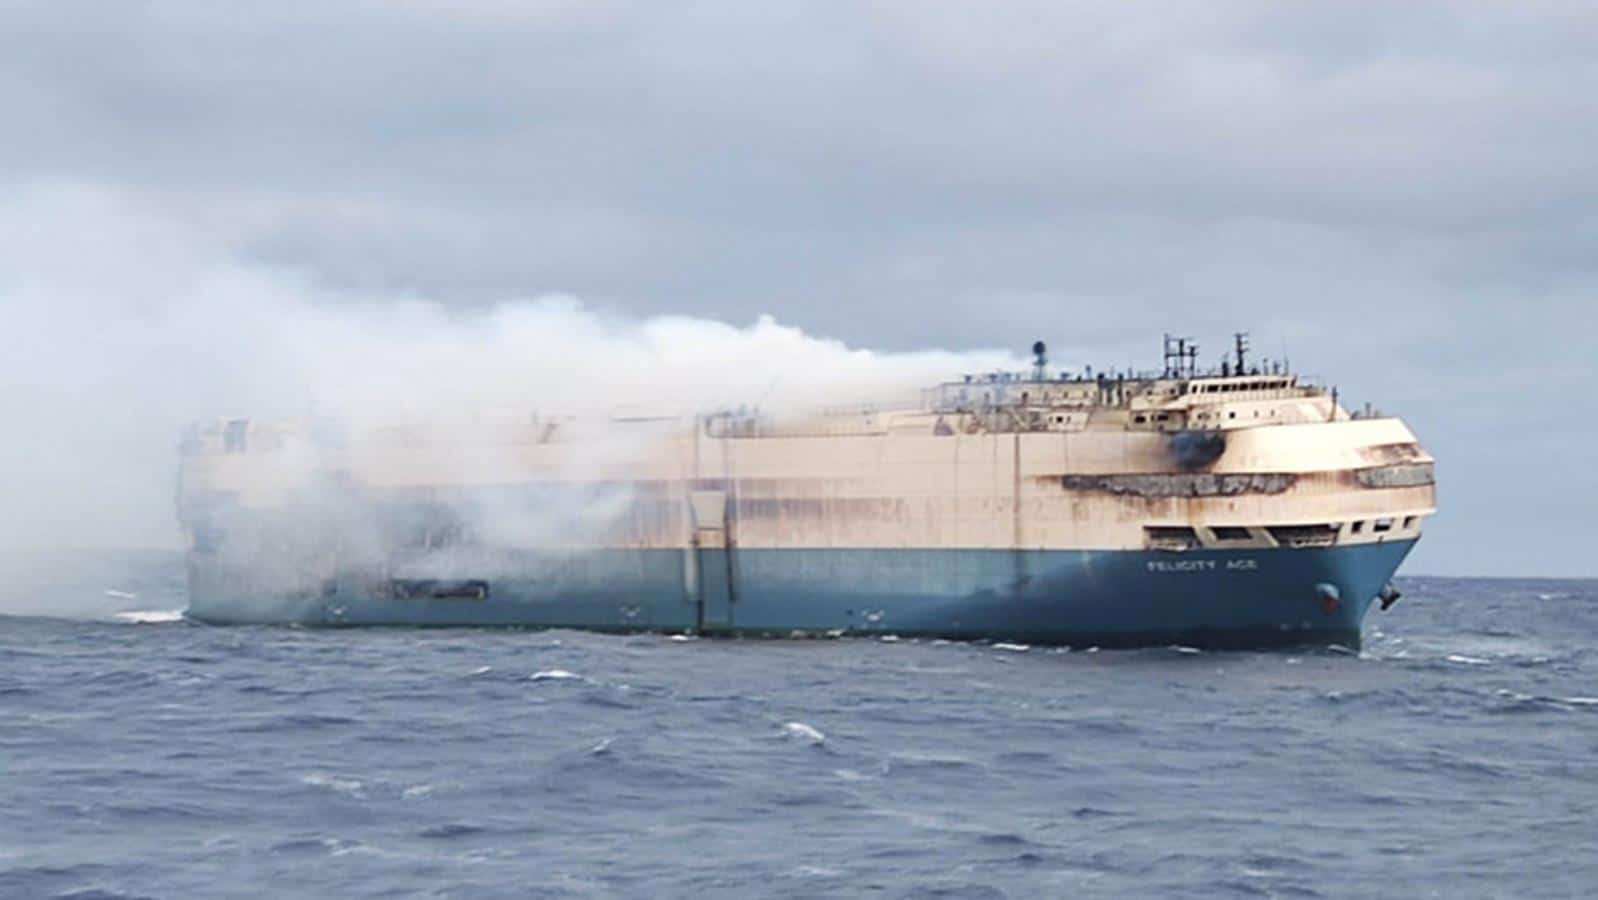 Thousands of luxury cars have been burning on the ship for days.  Why is the fire still consuming Felicity Ace?